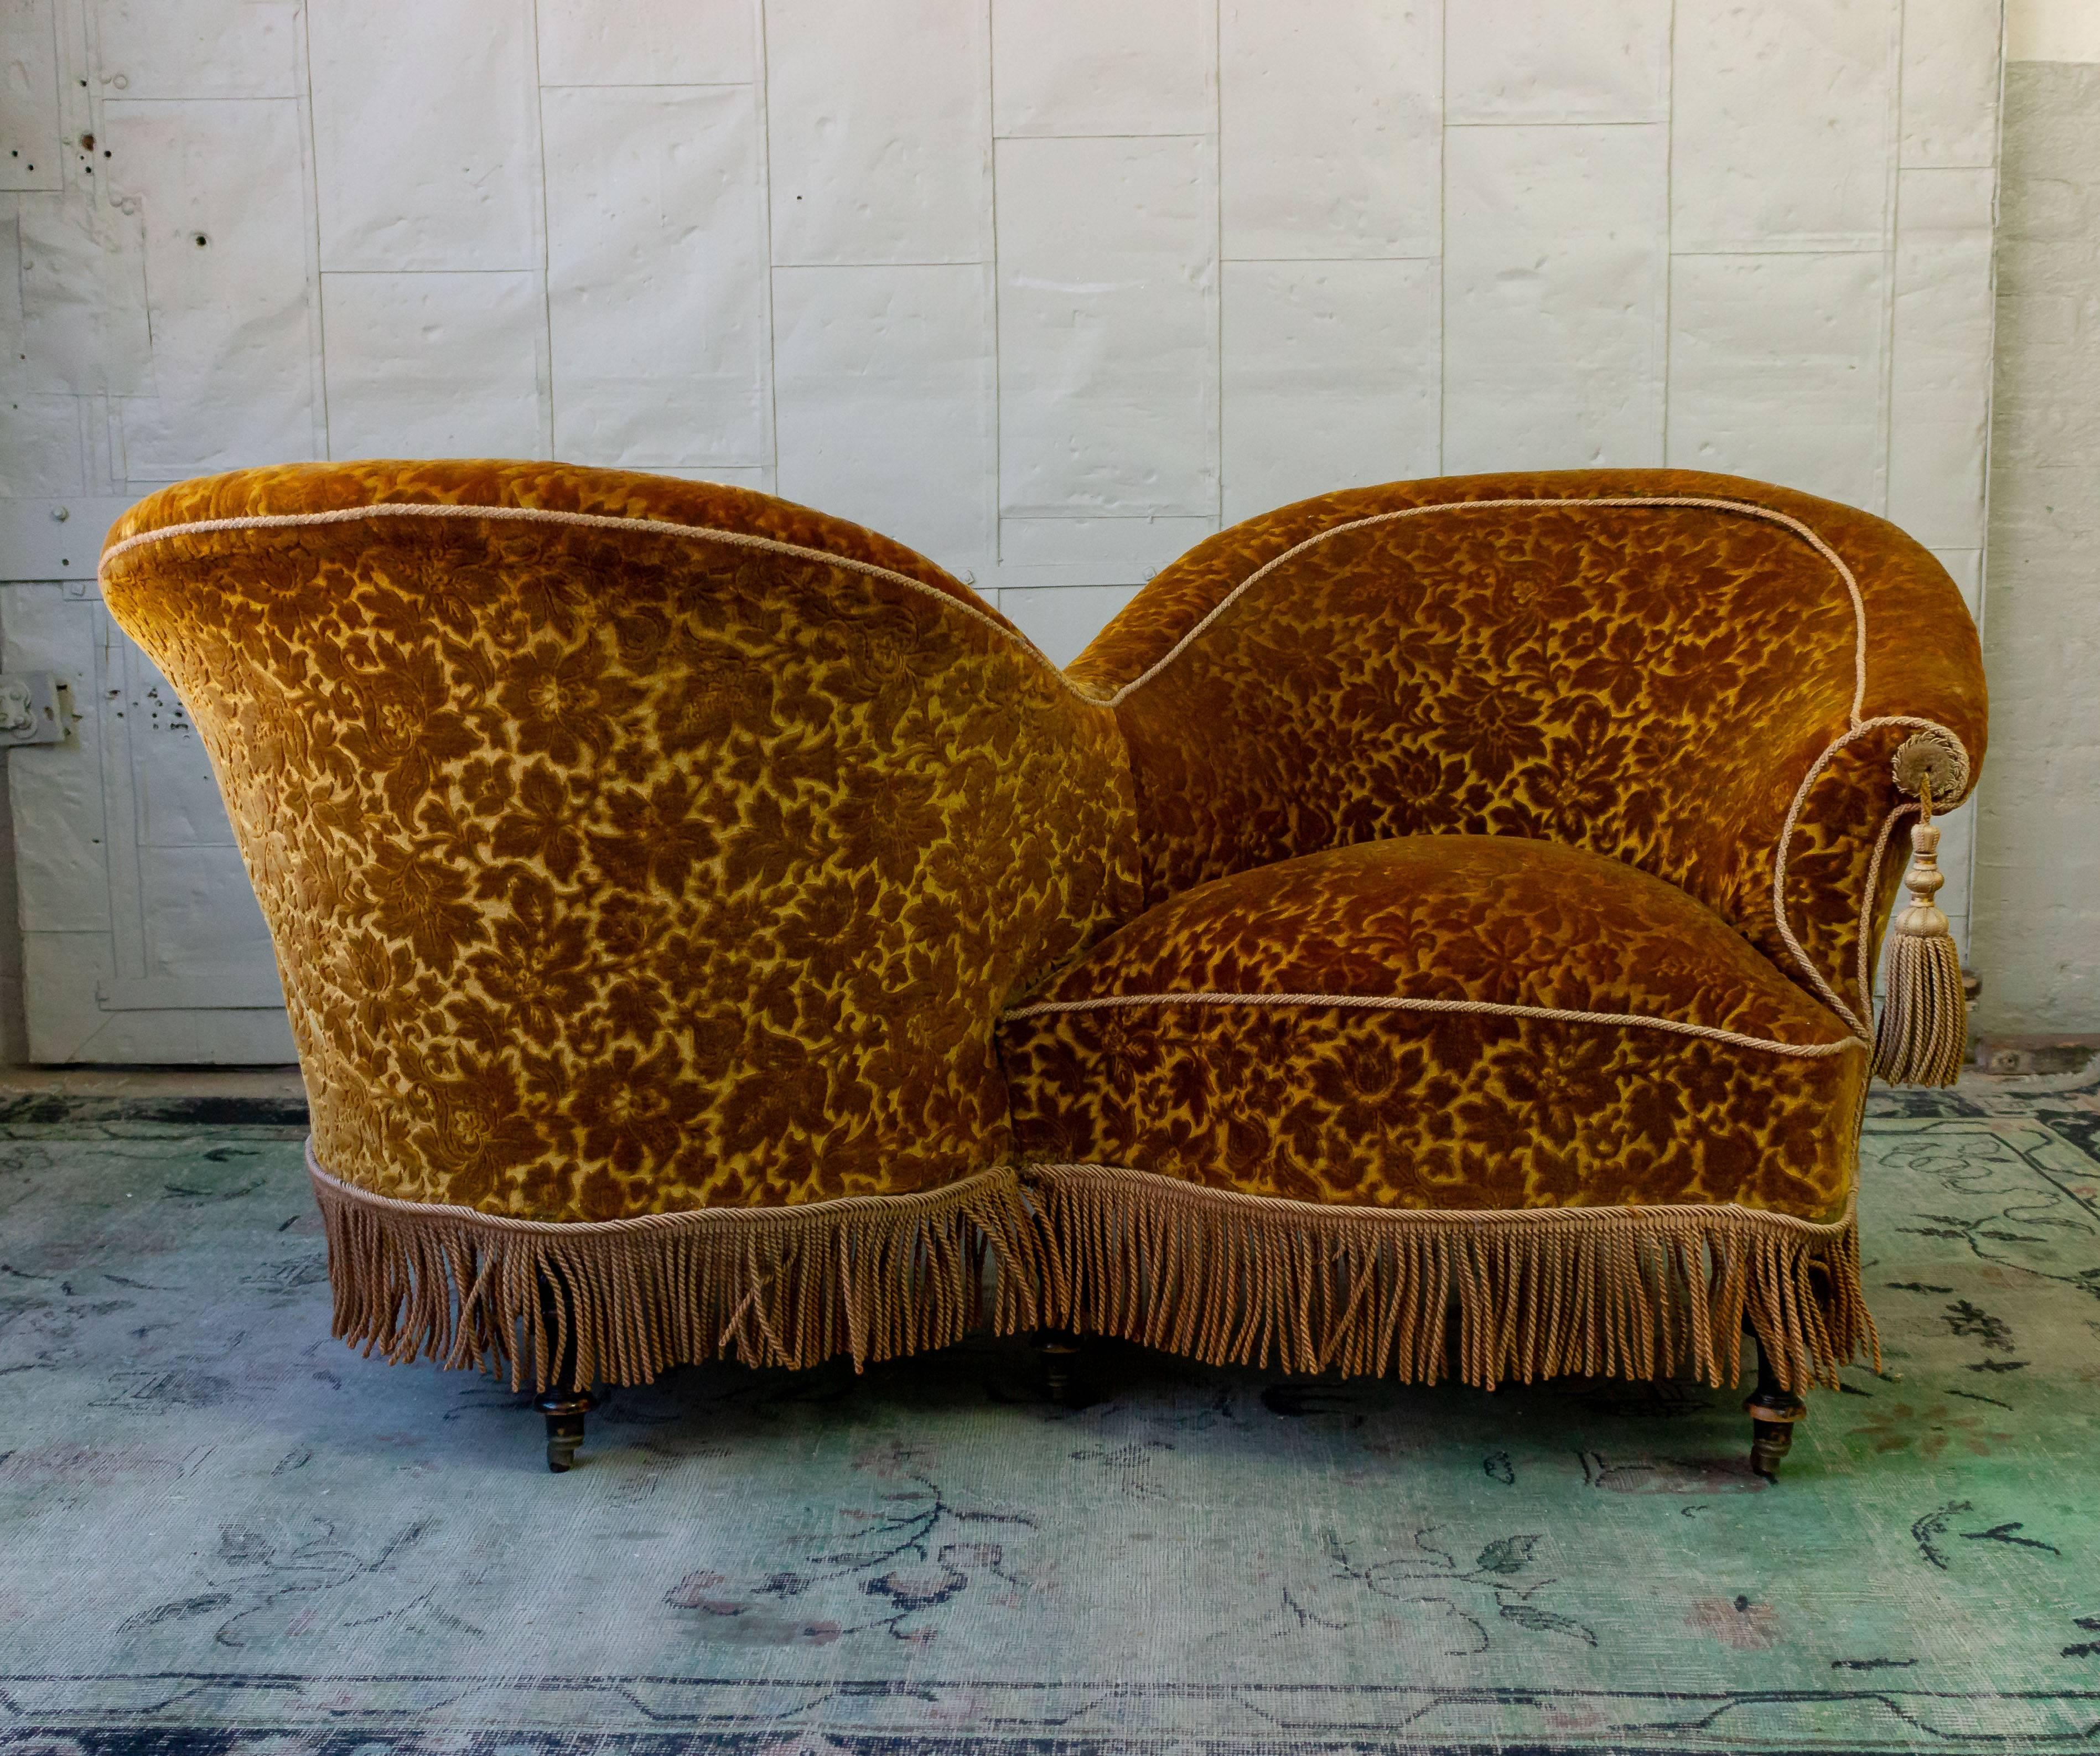 Unusual French armchair (s) called tête-à-tête in French, or a Conversation chair, 19th century Napoleon III period. In very good condition, upholstery most likely 1930s.